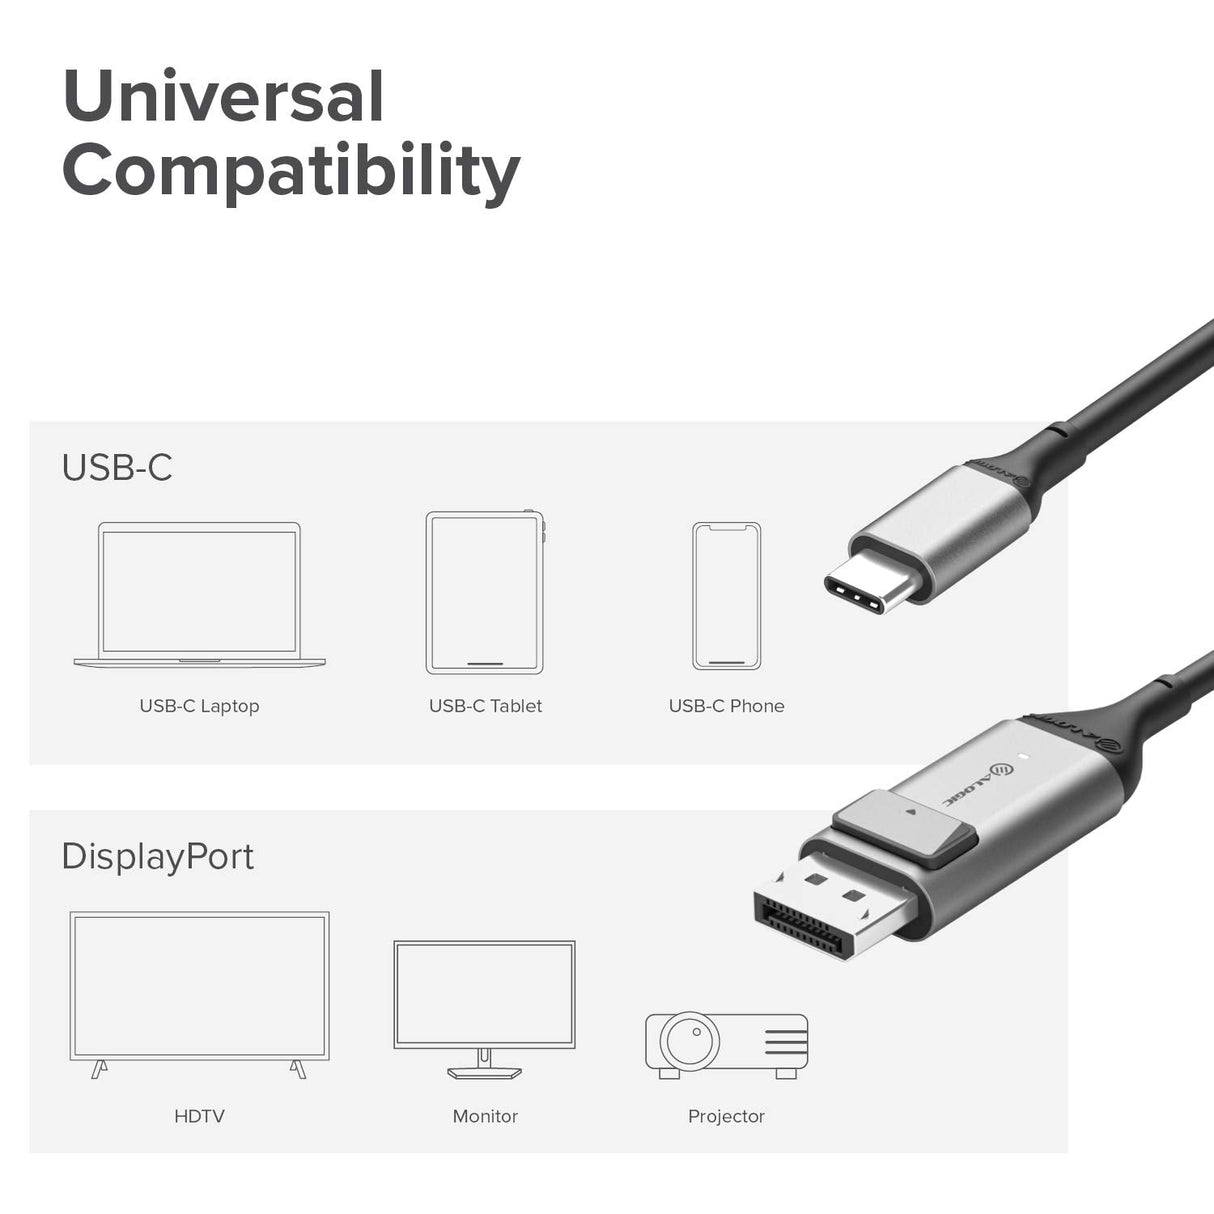 ALOGIC USB C to DisplayPort for Home Office, 6 ft Type C to DisplayPort Cable, Supports 4K 60Hz, (Thunderbolt 3 Compatible), MacBook Pro/Air, iPad Pro/Air 2020, XPS and More 2m/6.6ft Regular - Dealtargets.com